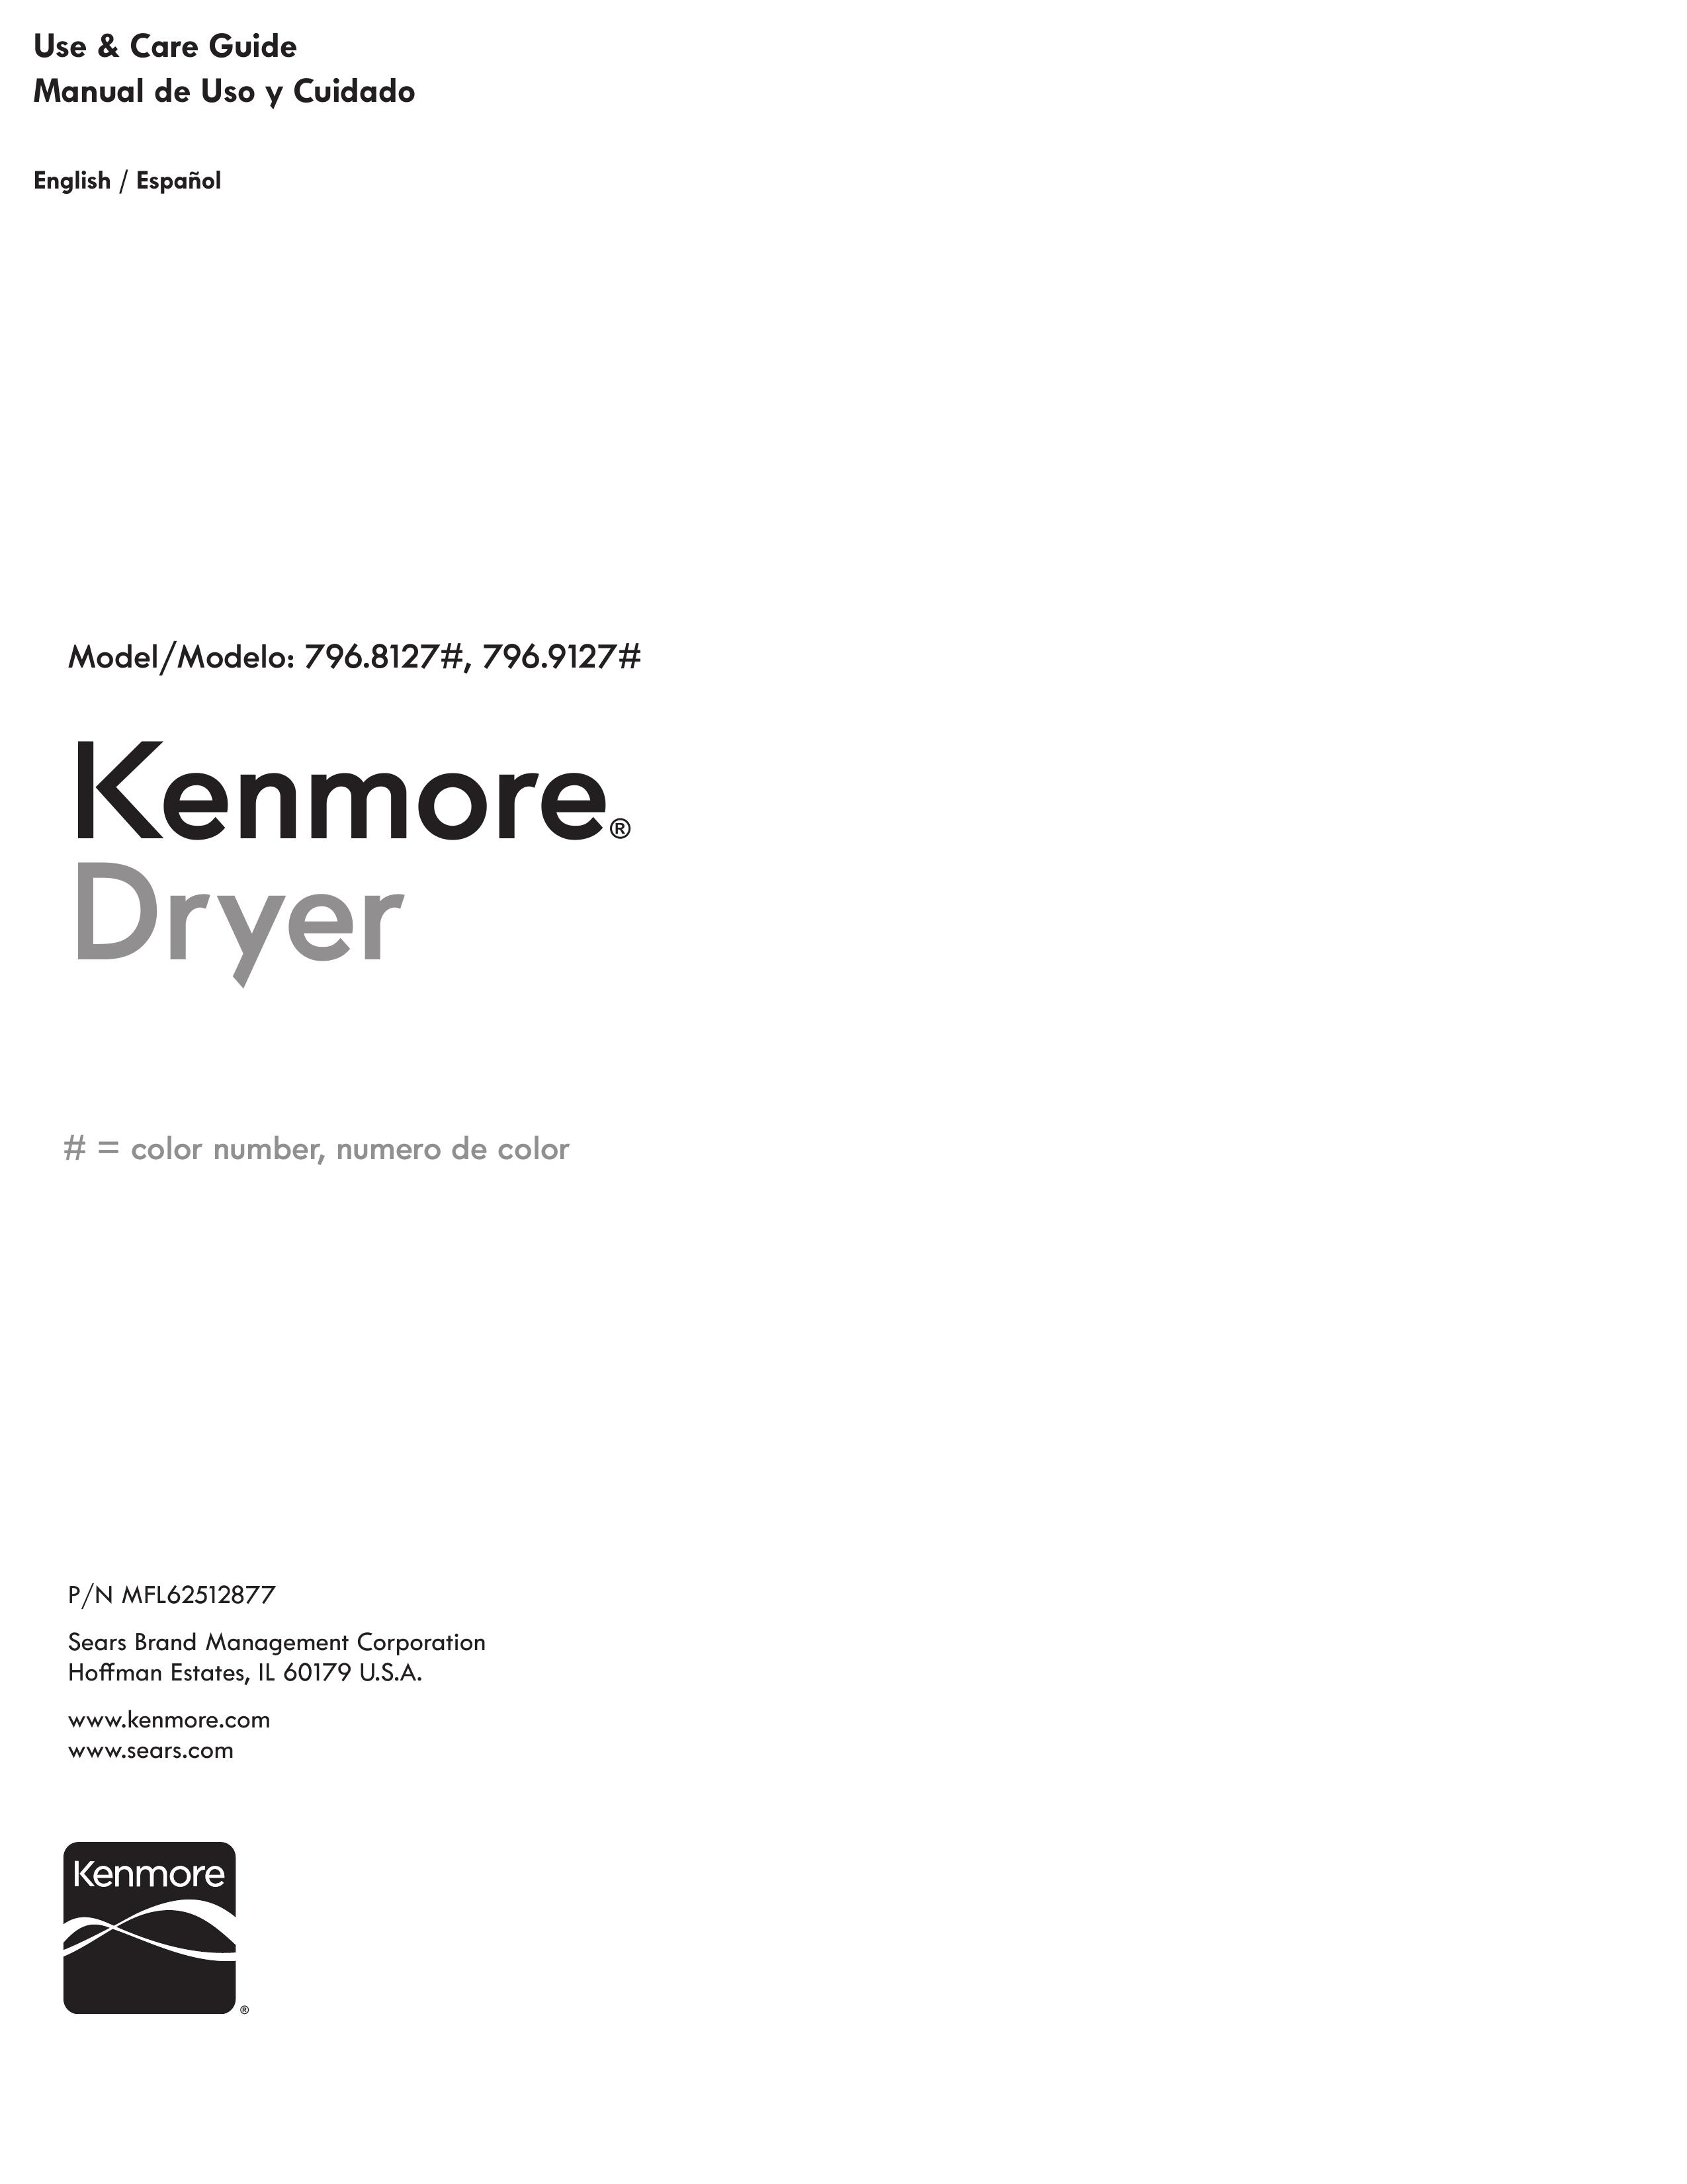 Kenmore 796.8127# Clothes Dryer User Manual